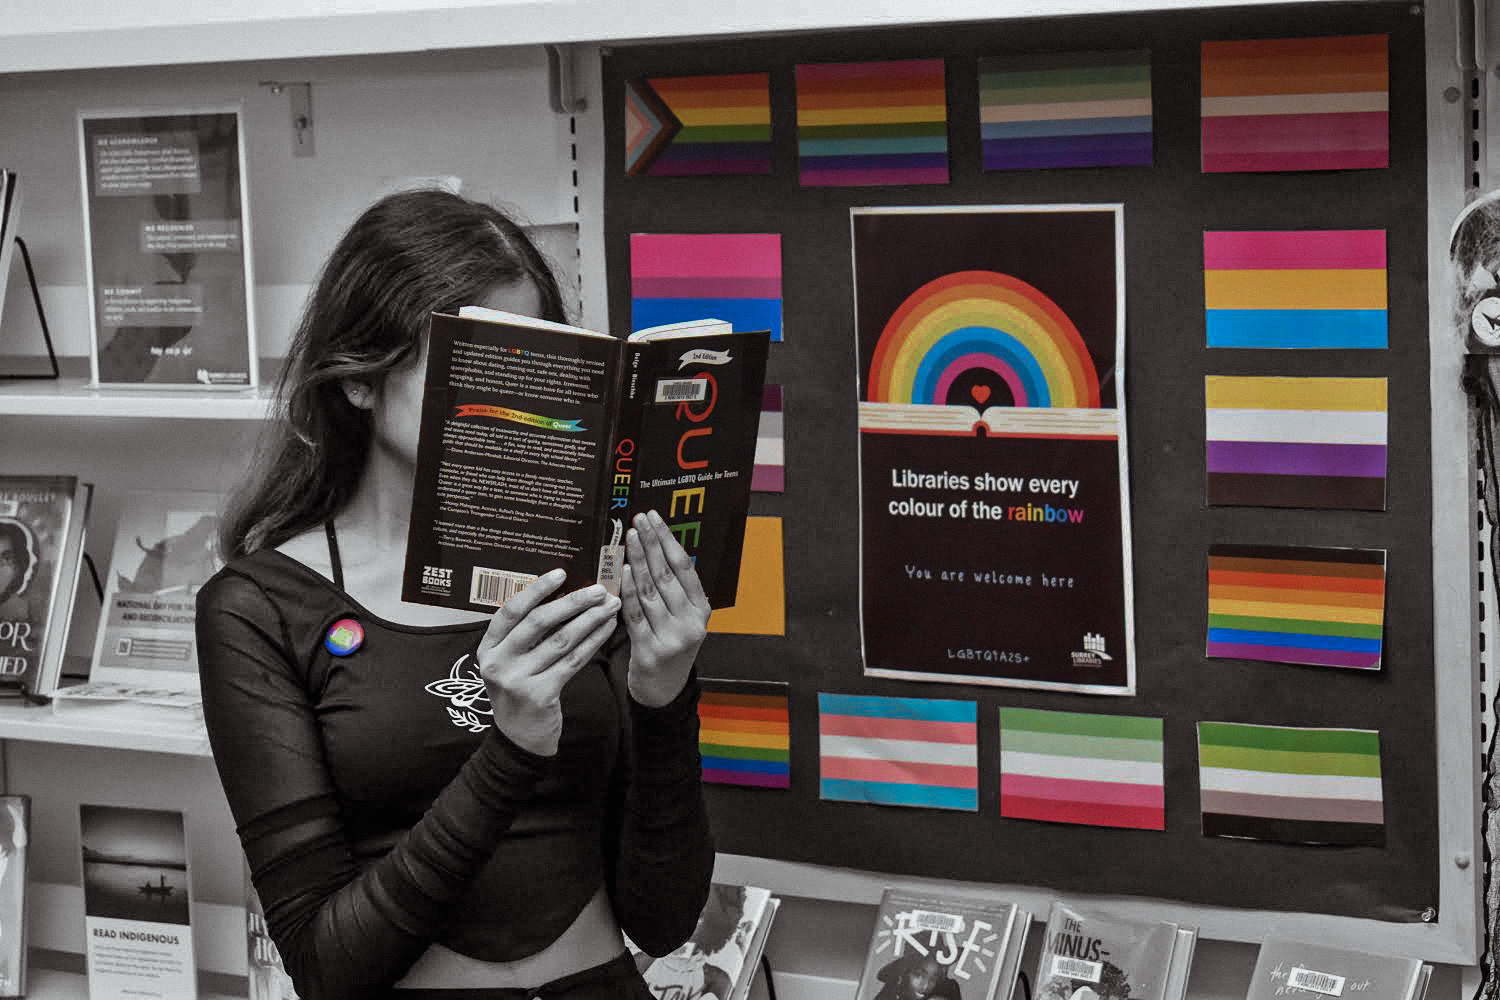 This is a photo of a student in the libarary. There are rows of bookshelves behind them, and they are holding a book titled, “Queer: The Ultimate LGBTQ Guide for Teens.” They are also standing in front of a rainbow poster which reads, “Libraries show every colour of the rainbow, you are welcome here.”